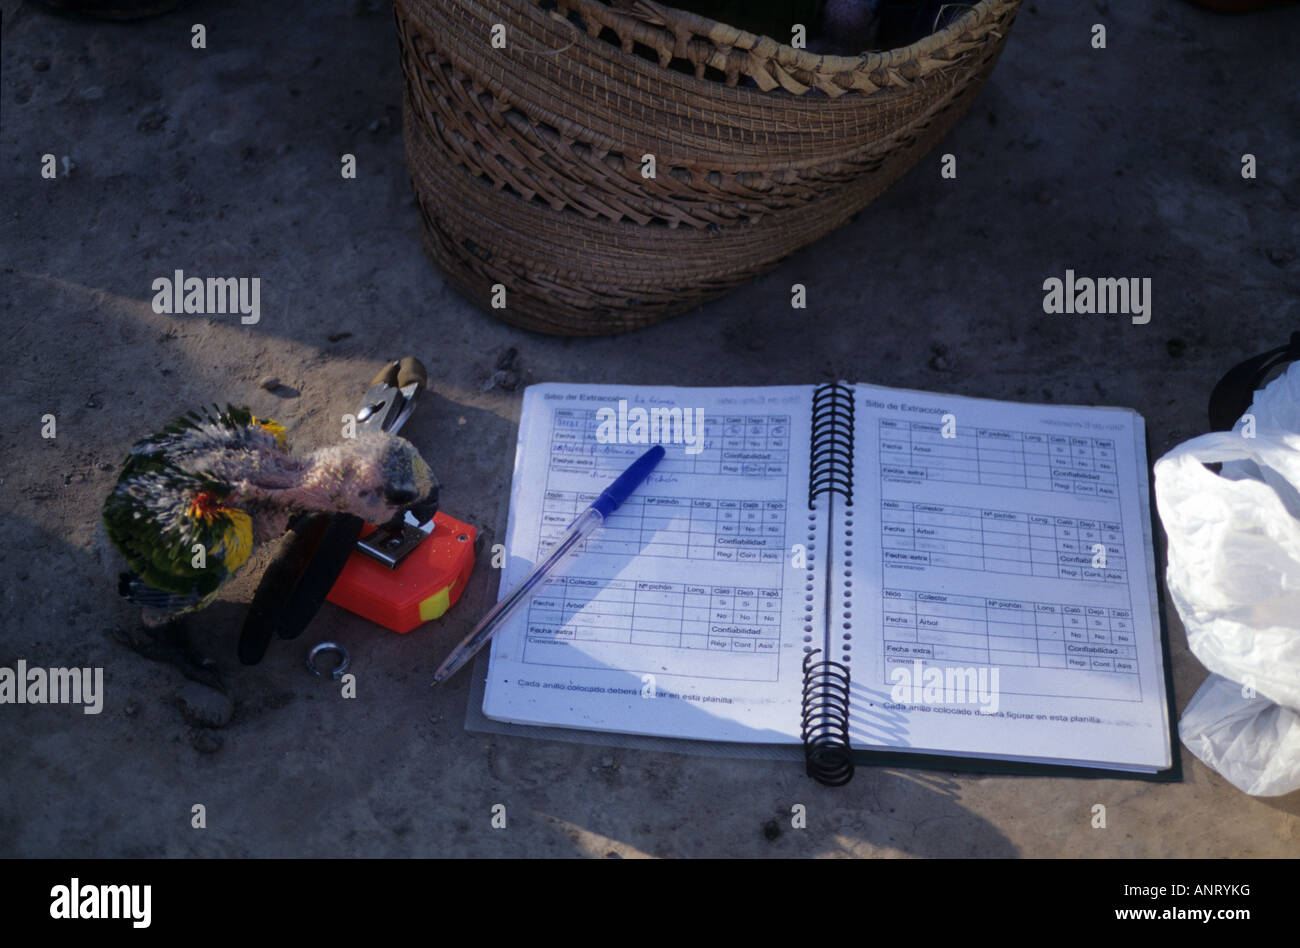 A baby parrot about to be measured by biologists. Fieldwork equipment Stock Photo